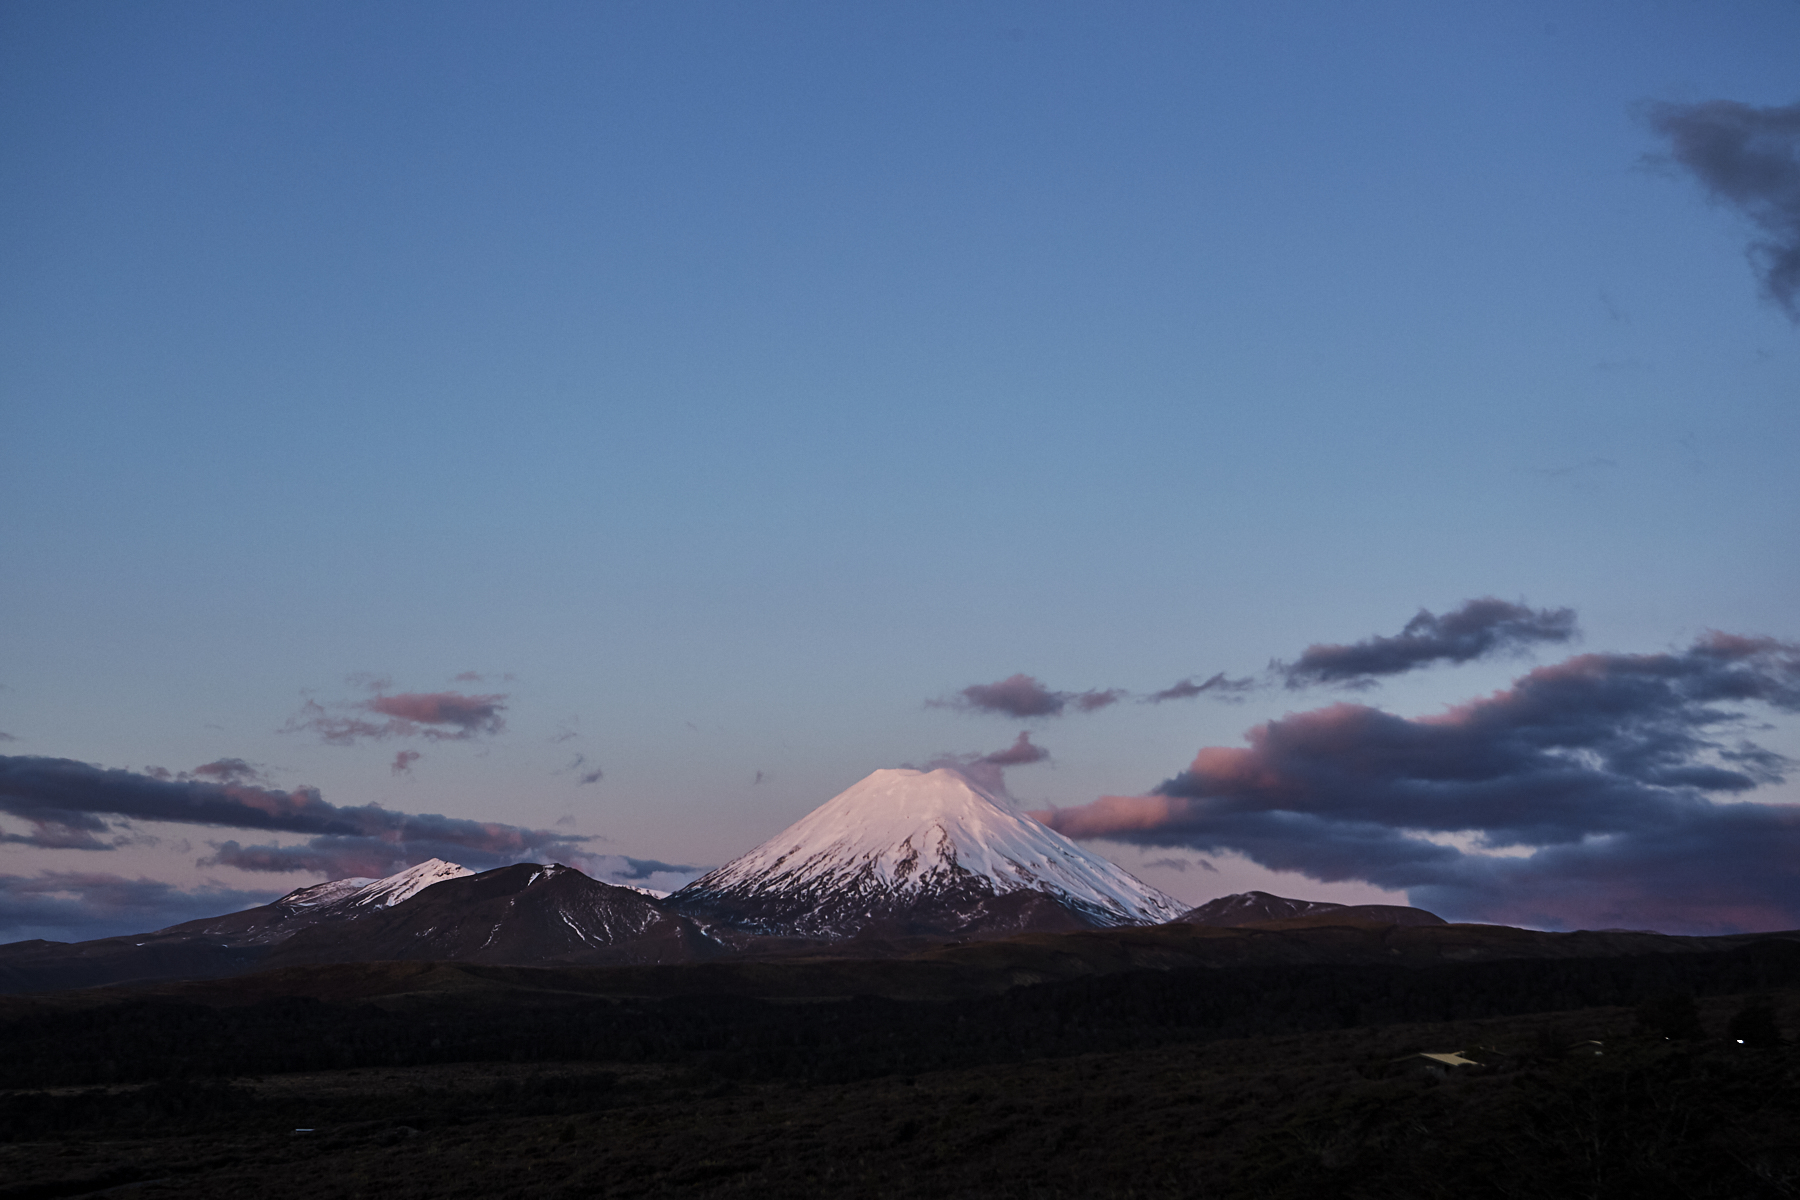 After visiting Glow Worm caves it's of to Tongariro, North Island, New Zealand